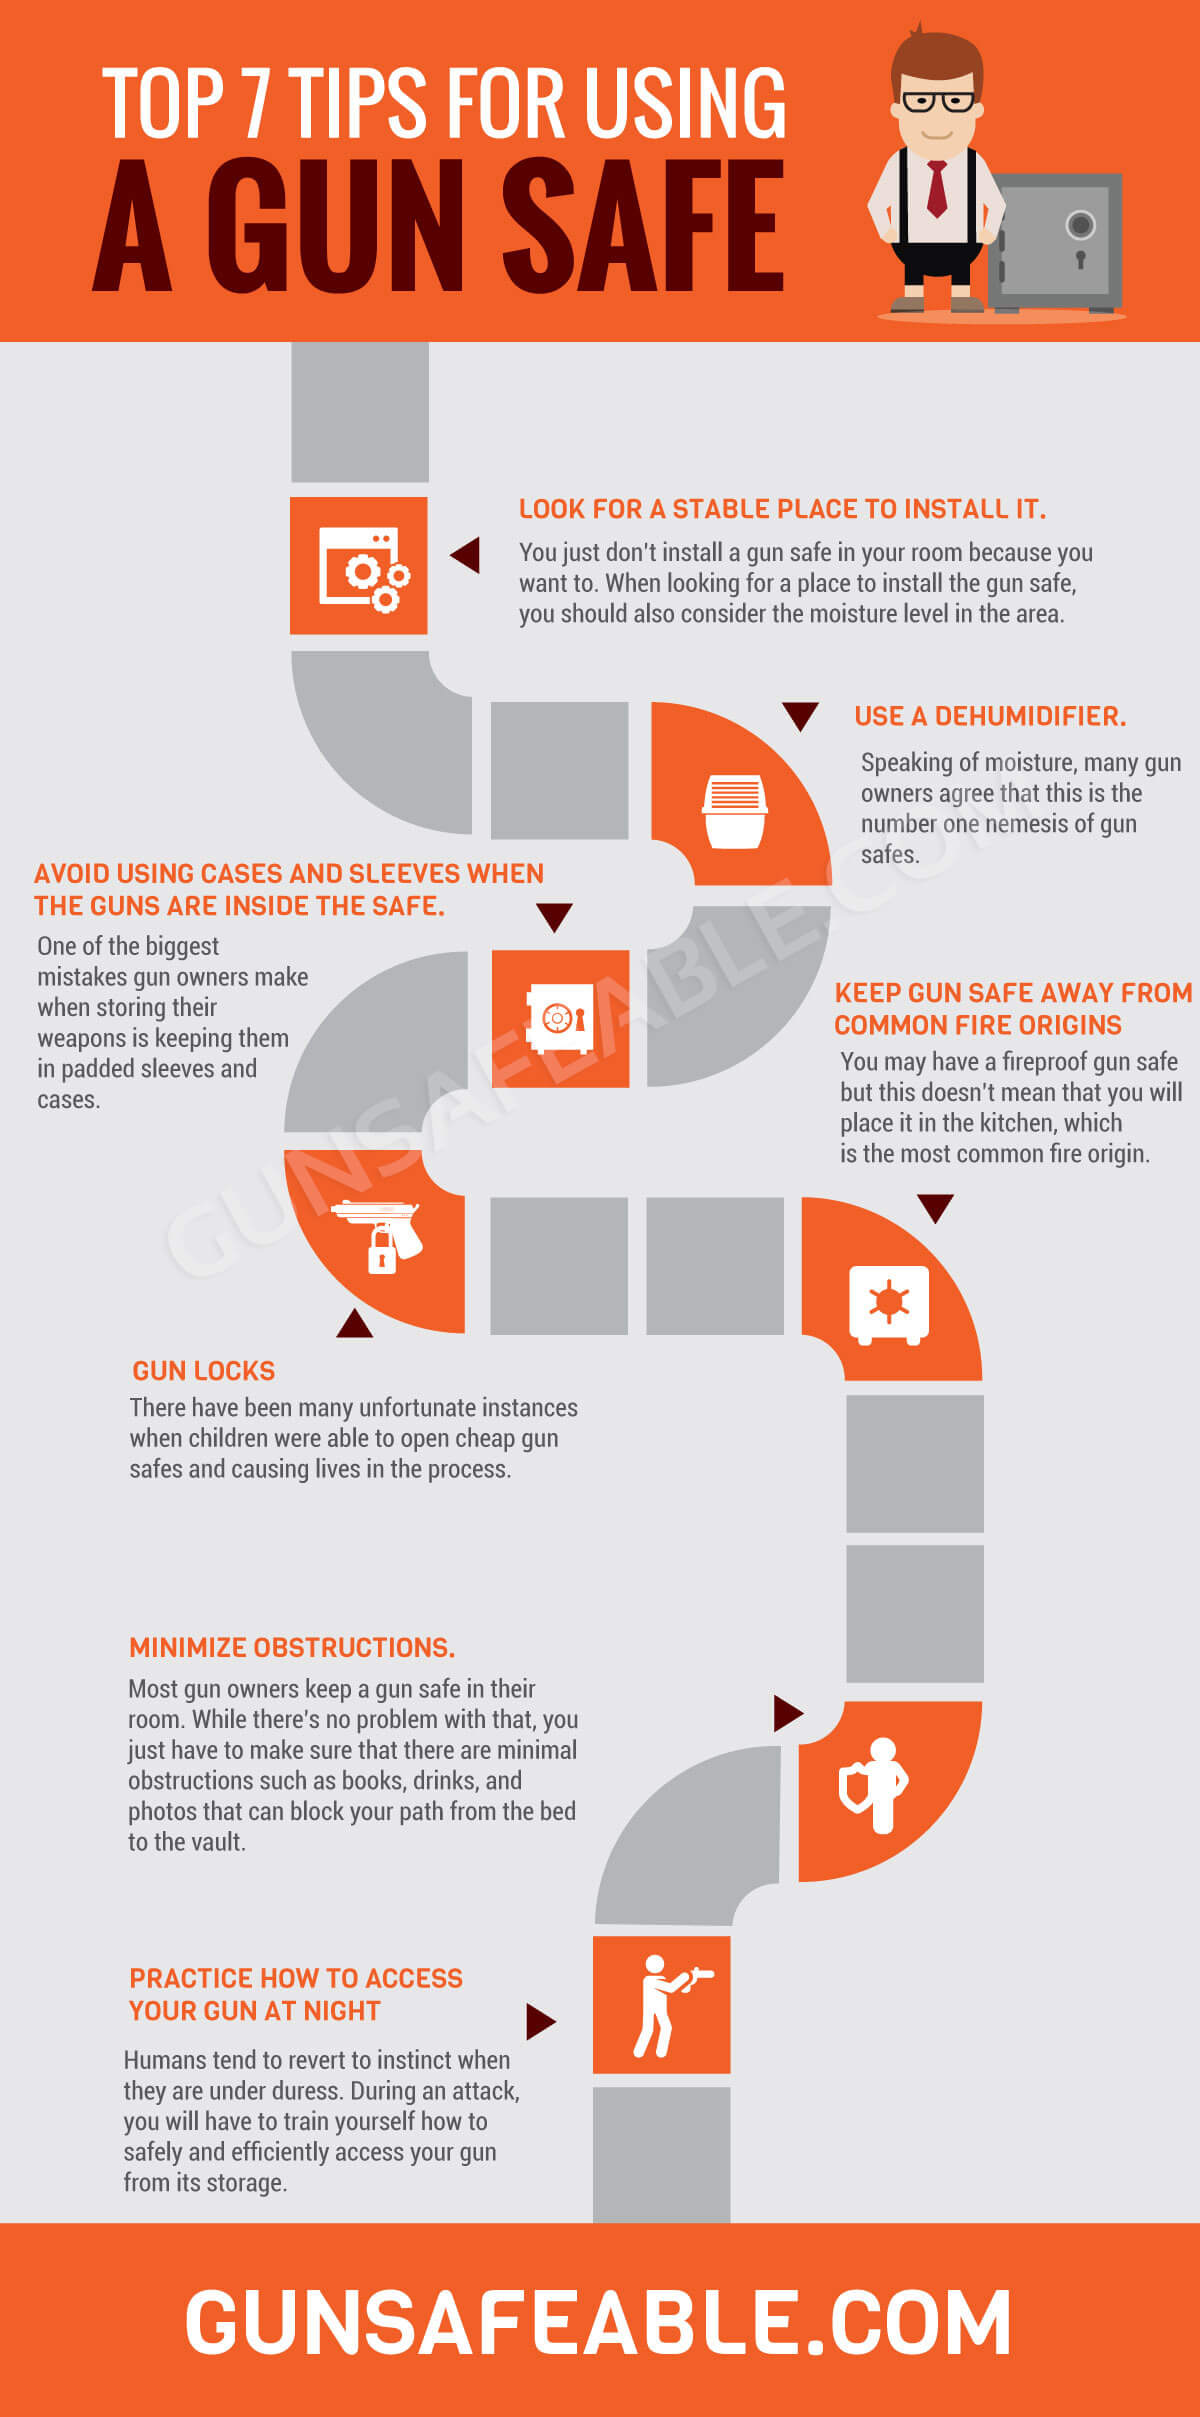 [INFOGRAPHIC] Top Seven Tips for Using a Gun Safe